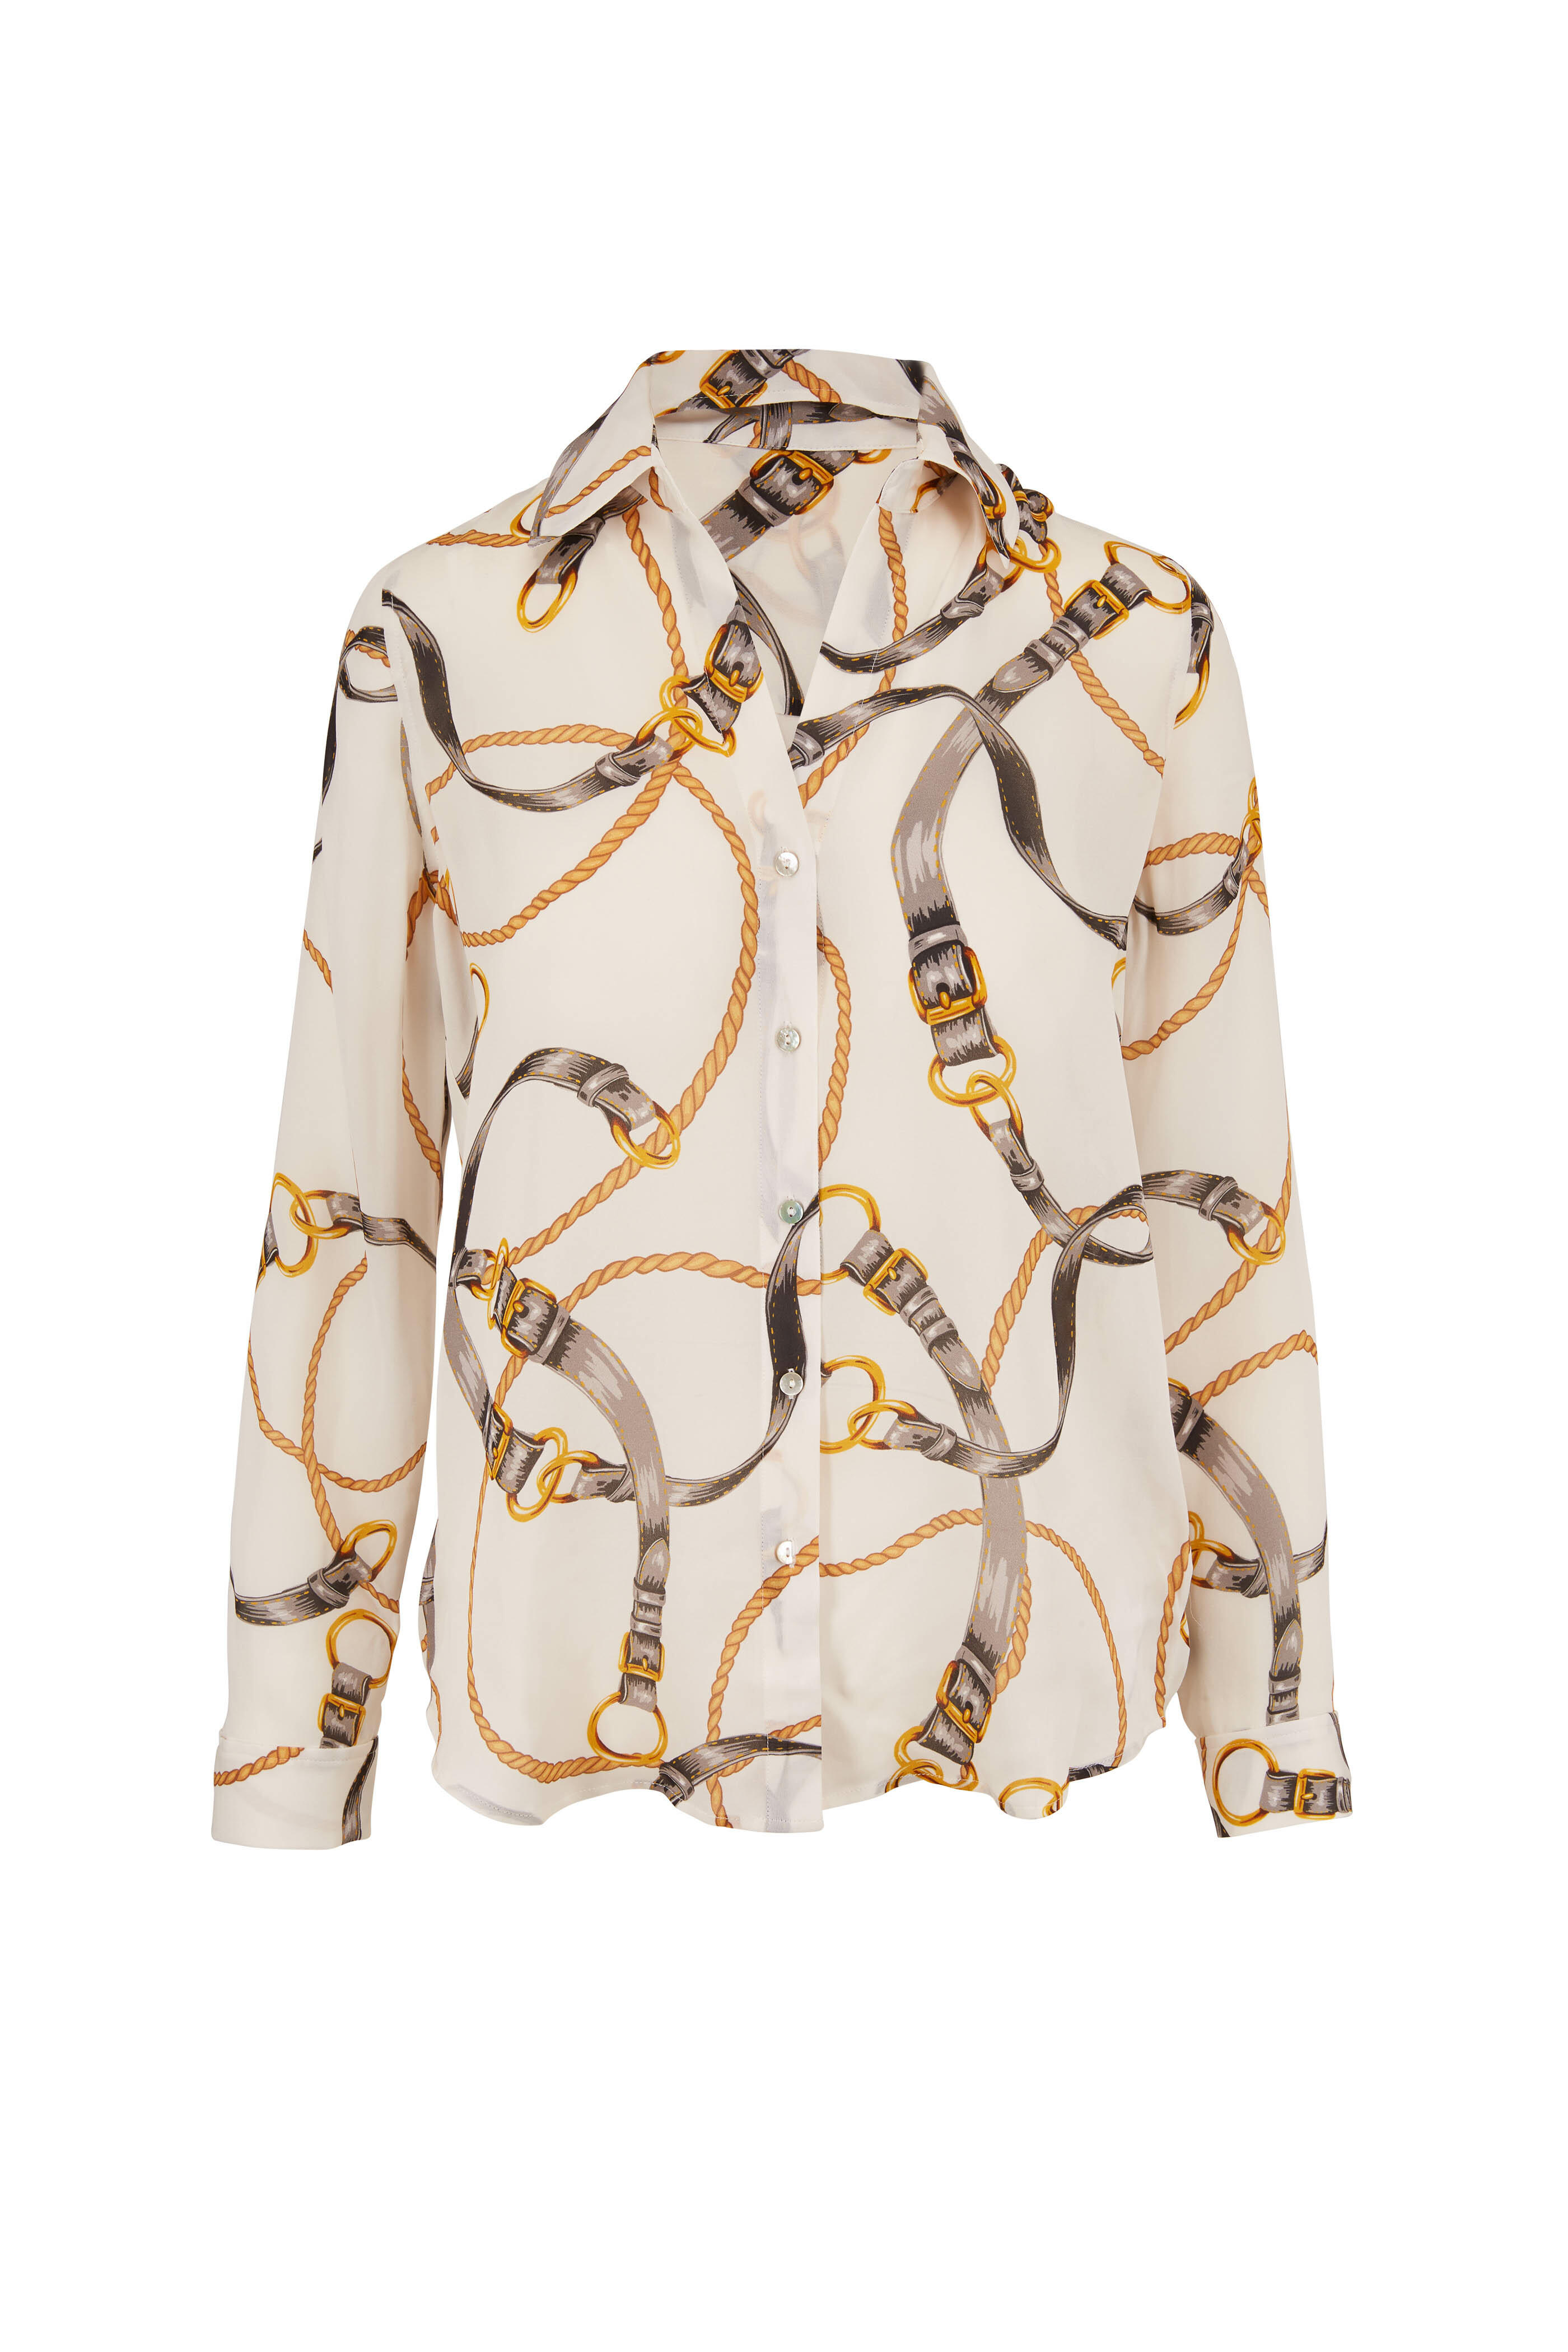 Off-White Silk Shirt with Graphic Print